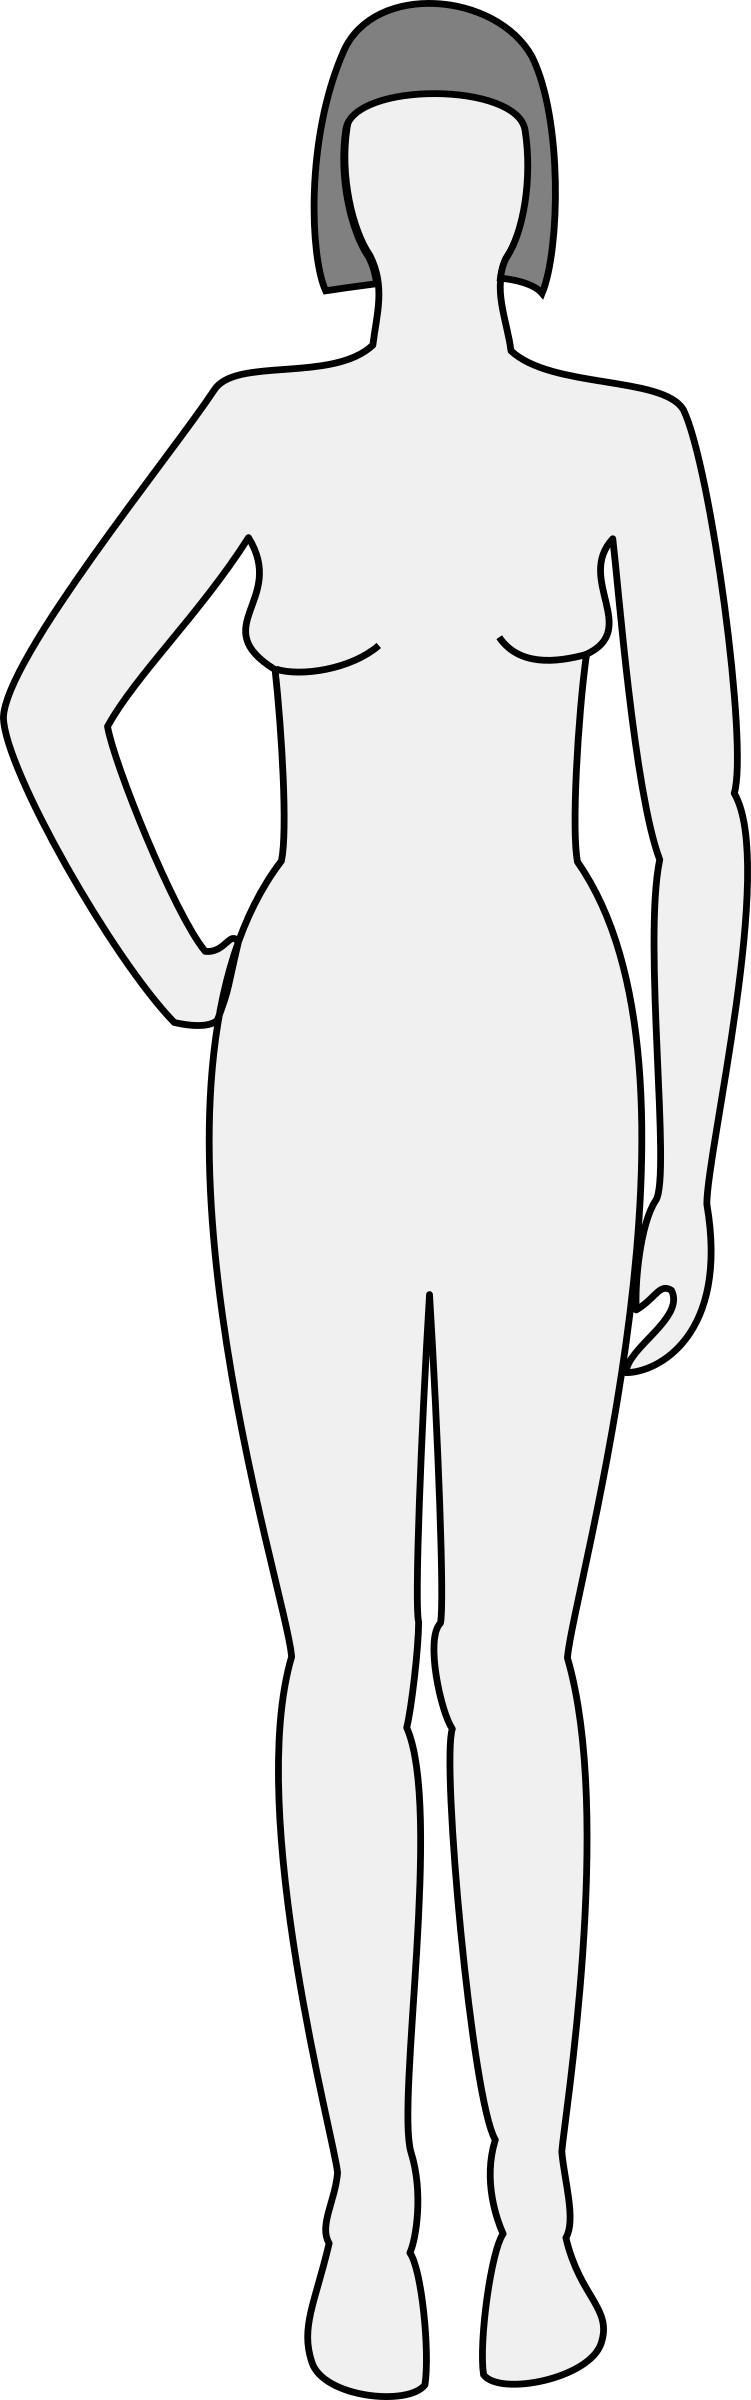 Female body silhouette - front png transparent